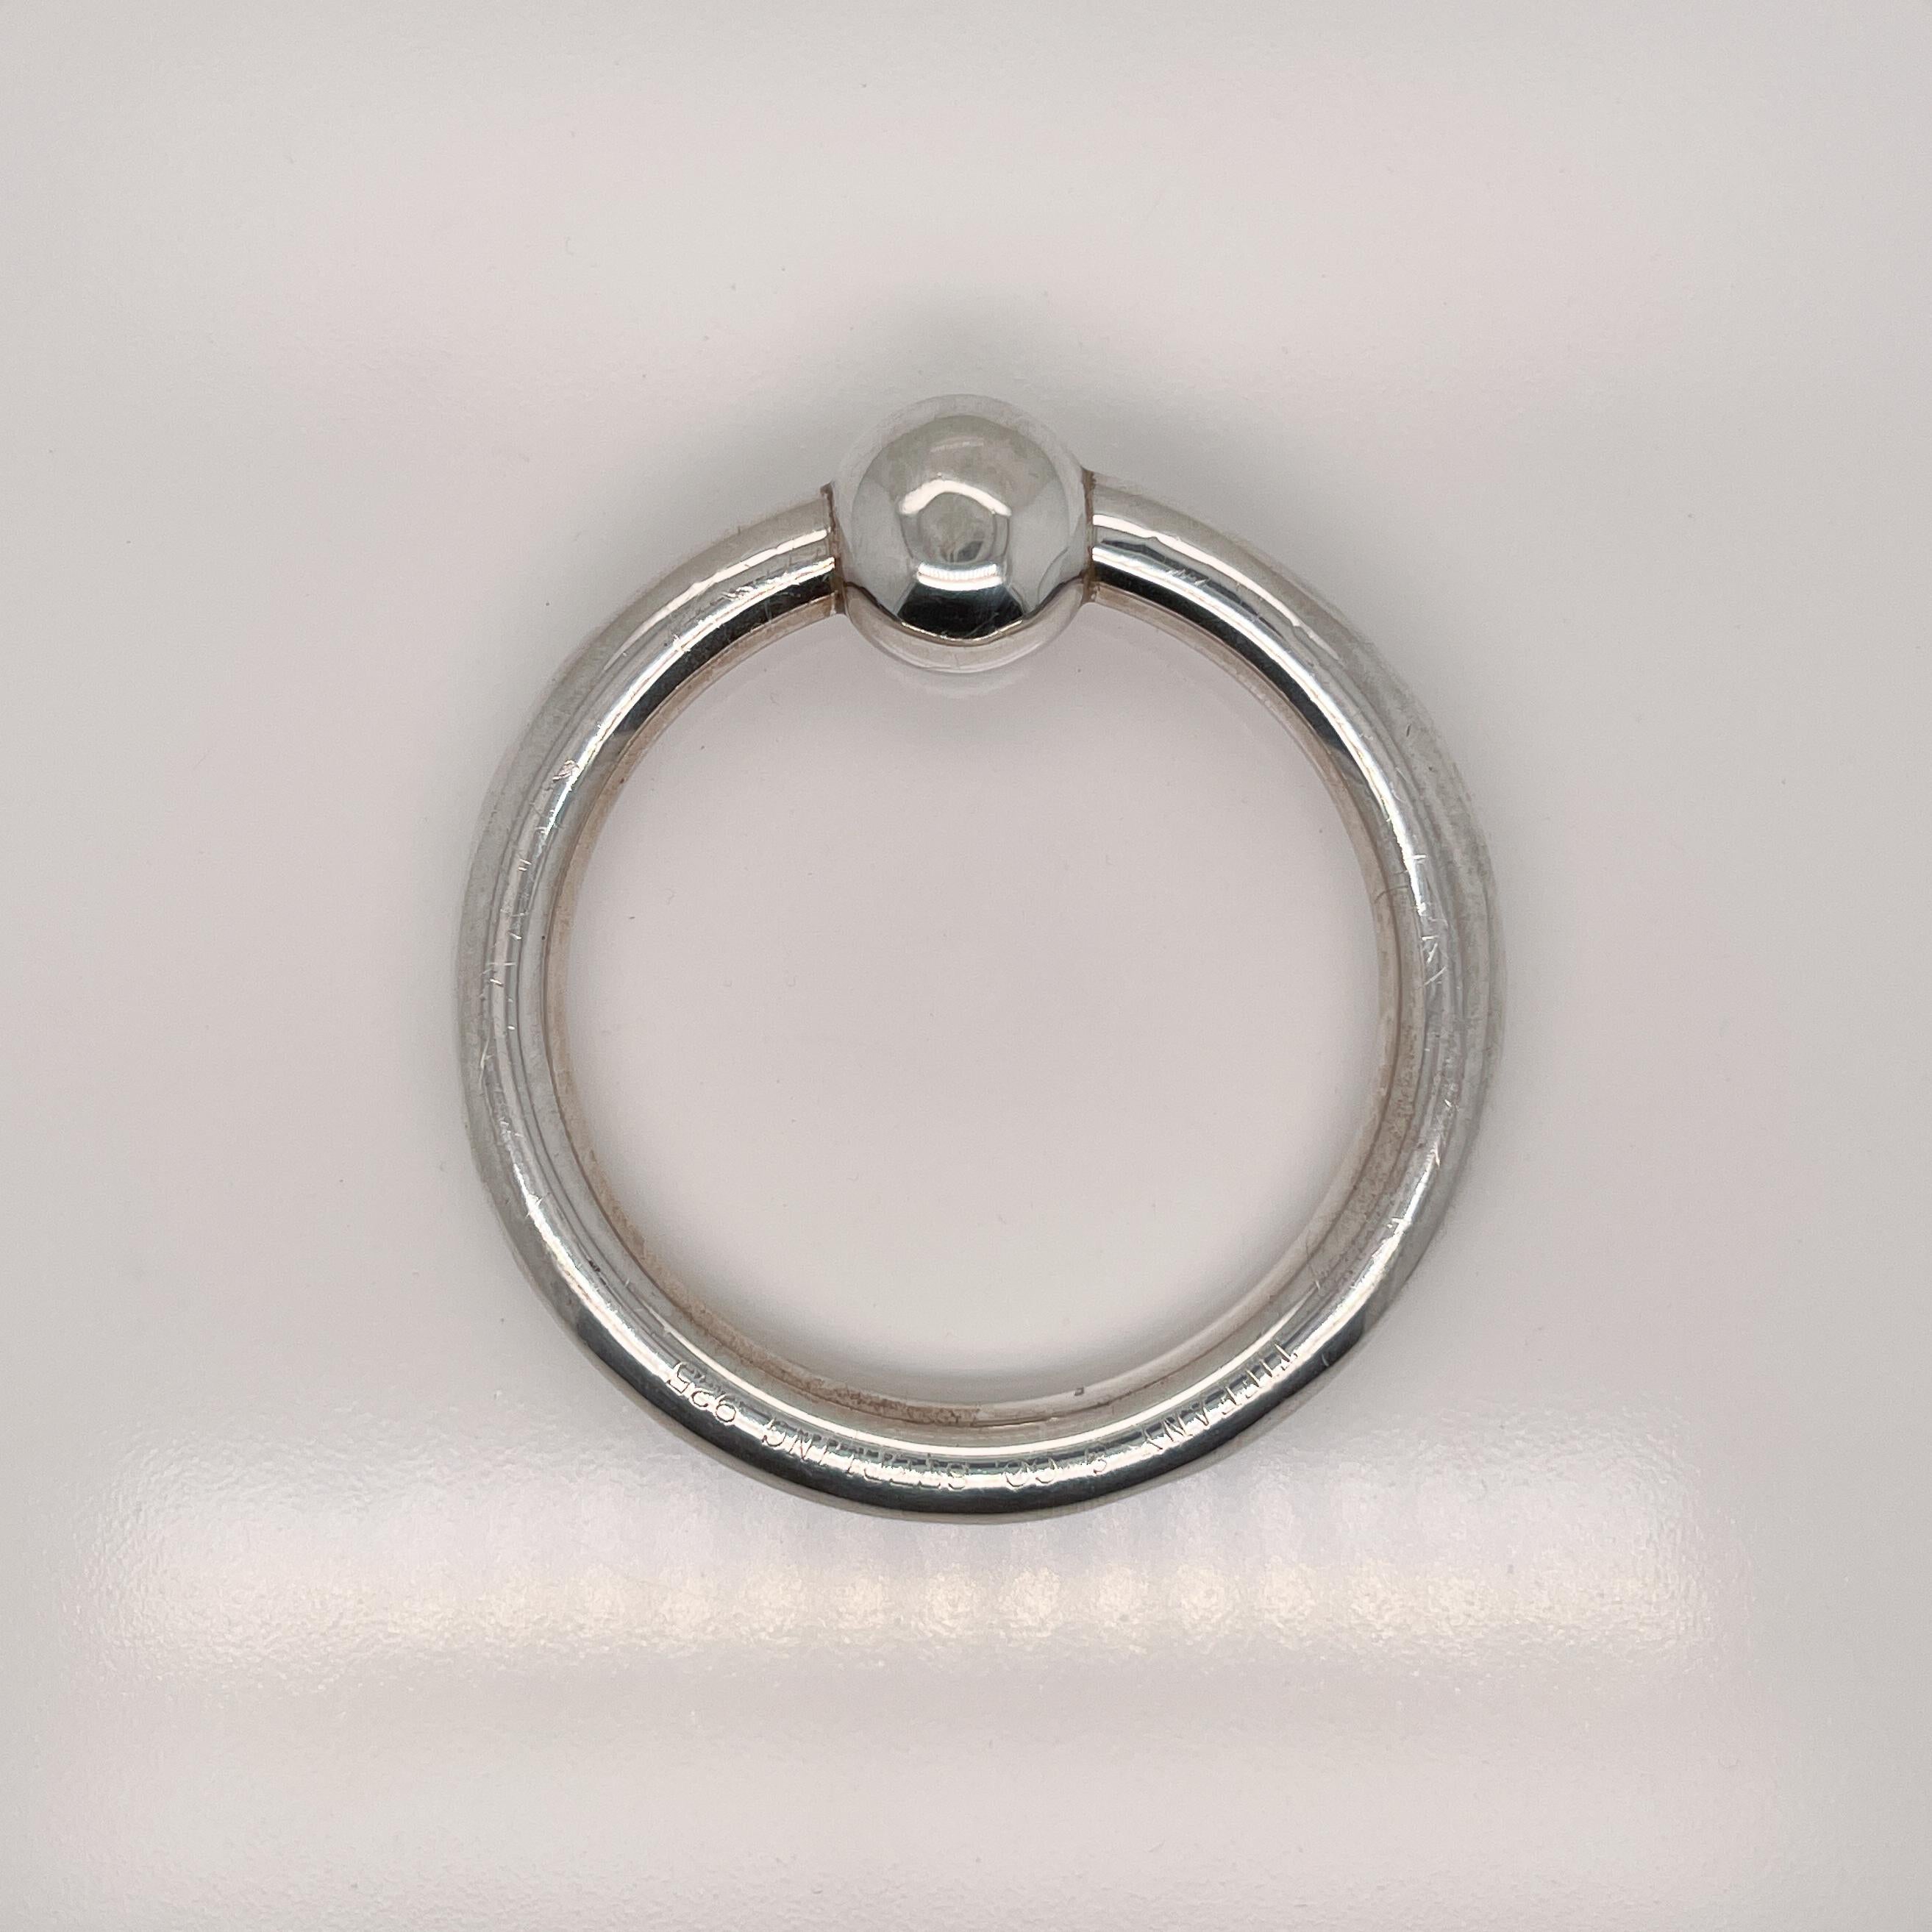 A fine sterling silver baby teething ring.

By Tiffany & Co.

With an internal rattle.

Simply a great piece from Tiffany & Co!

Date:
Mid-20th Century

Overall Condition:
It is in overall fair, as-pictured, used estate condition.

Condition